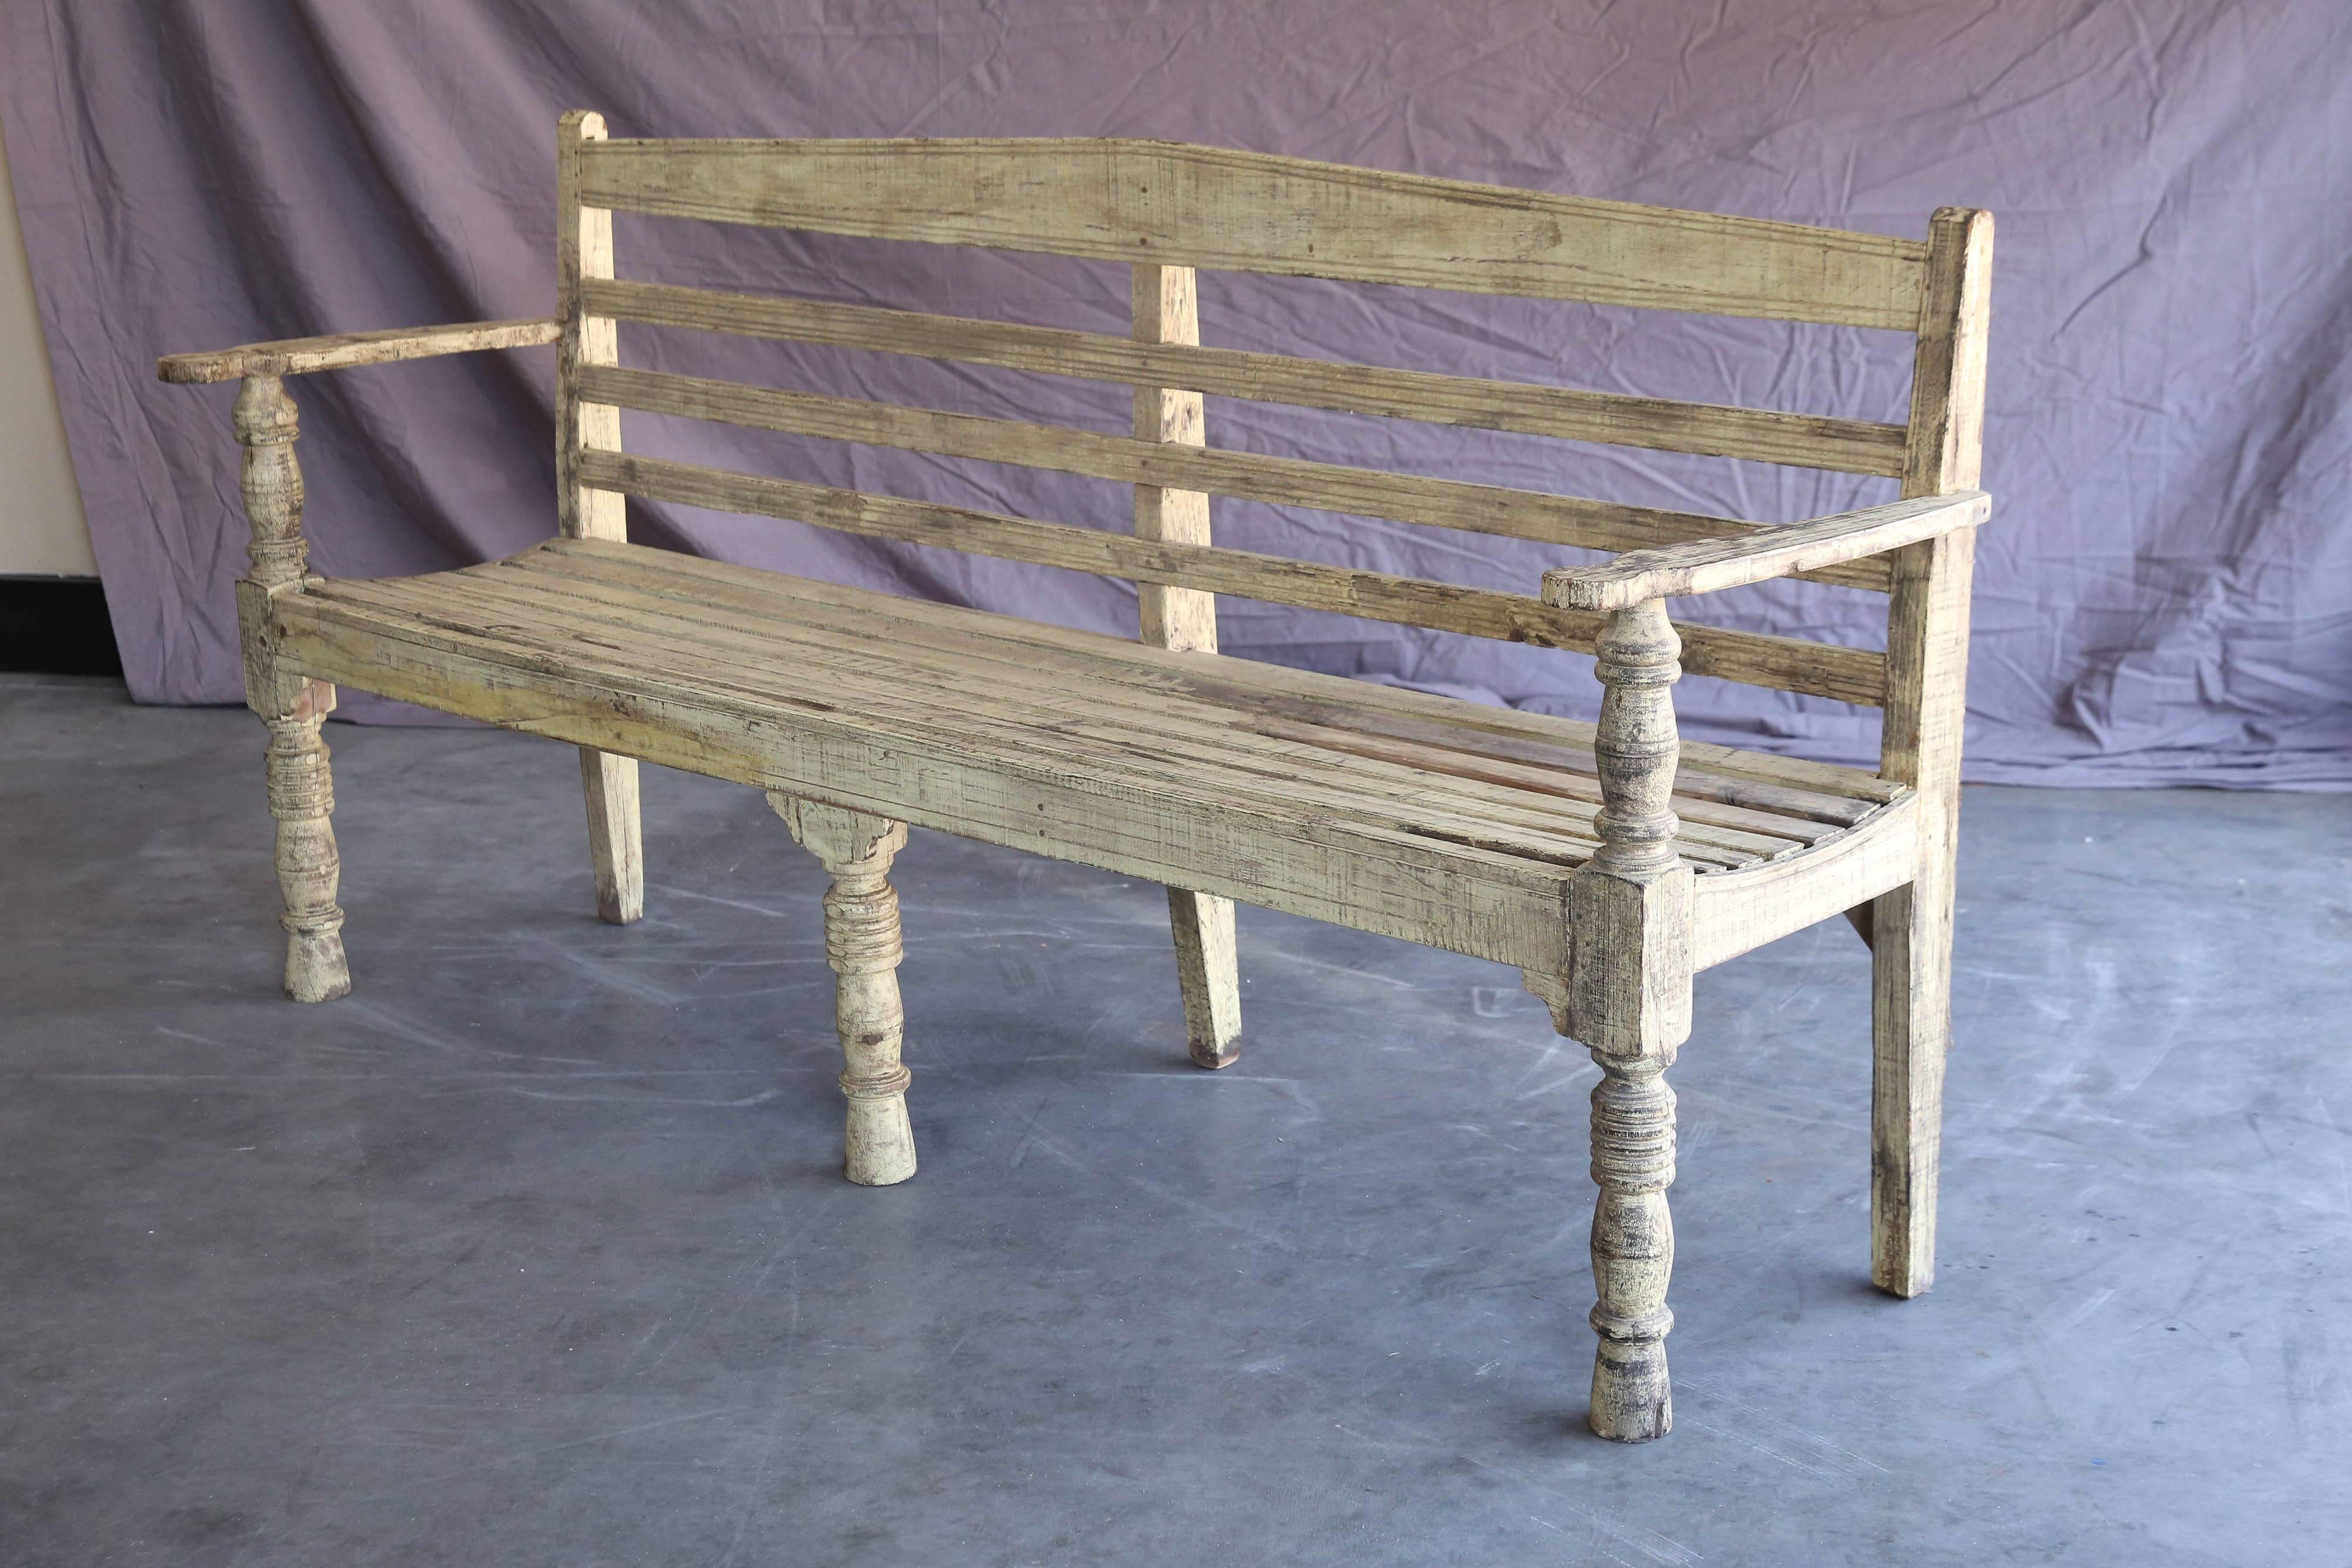 This bench is handcrafted in mahogany wood and painted in white to blend with the large open hall that used to display the cream of the harvests every year. It is supported on six legs and is solid like a rock. Meant to last several generations. A